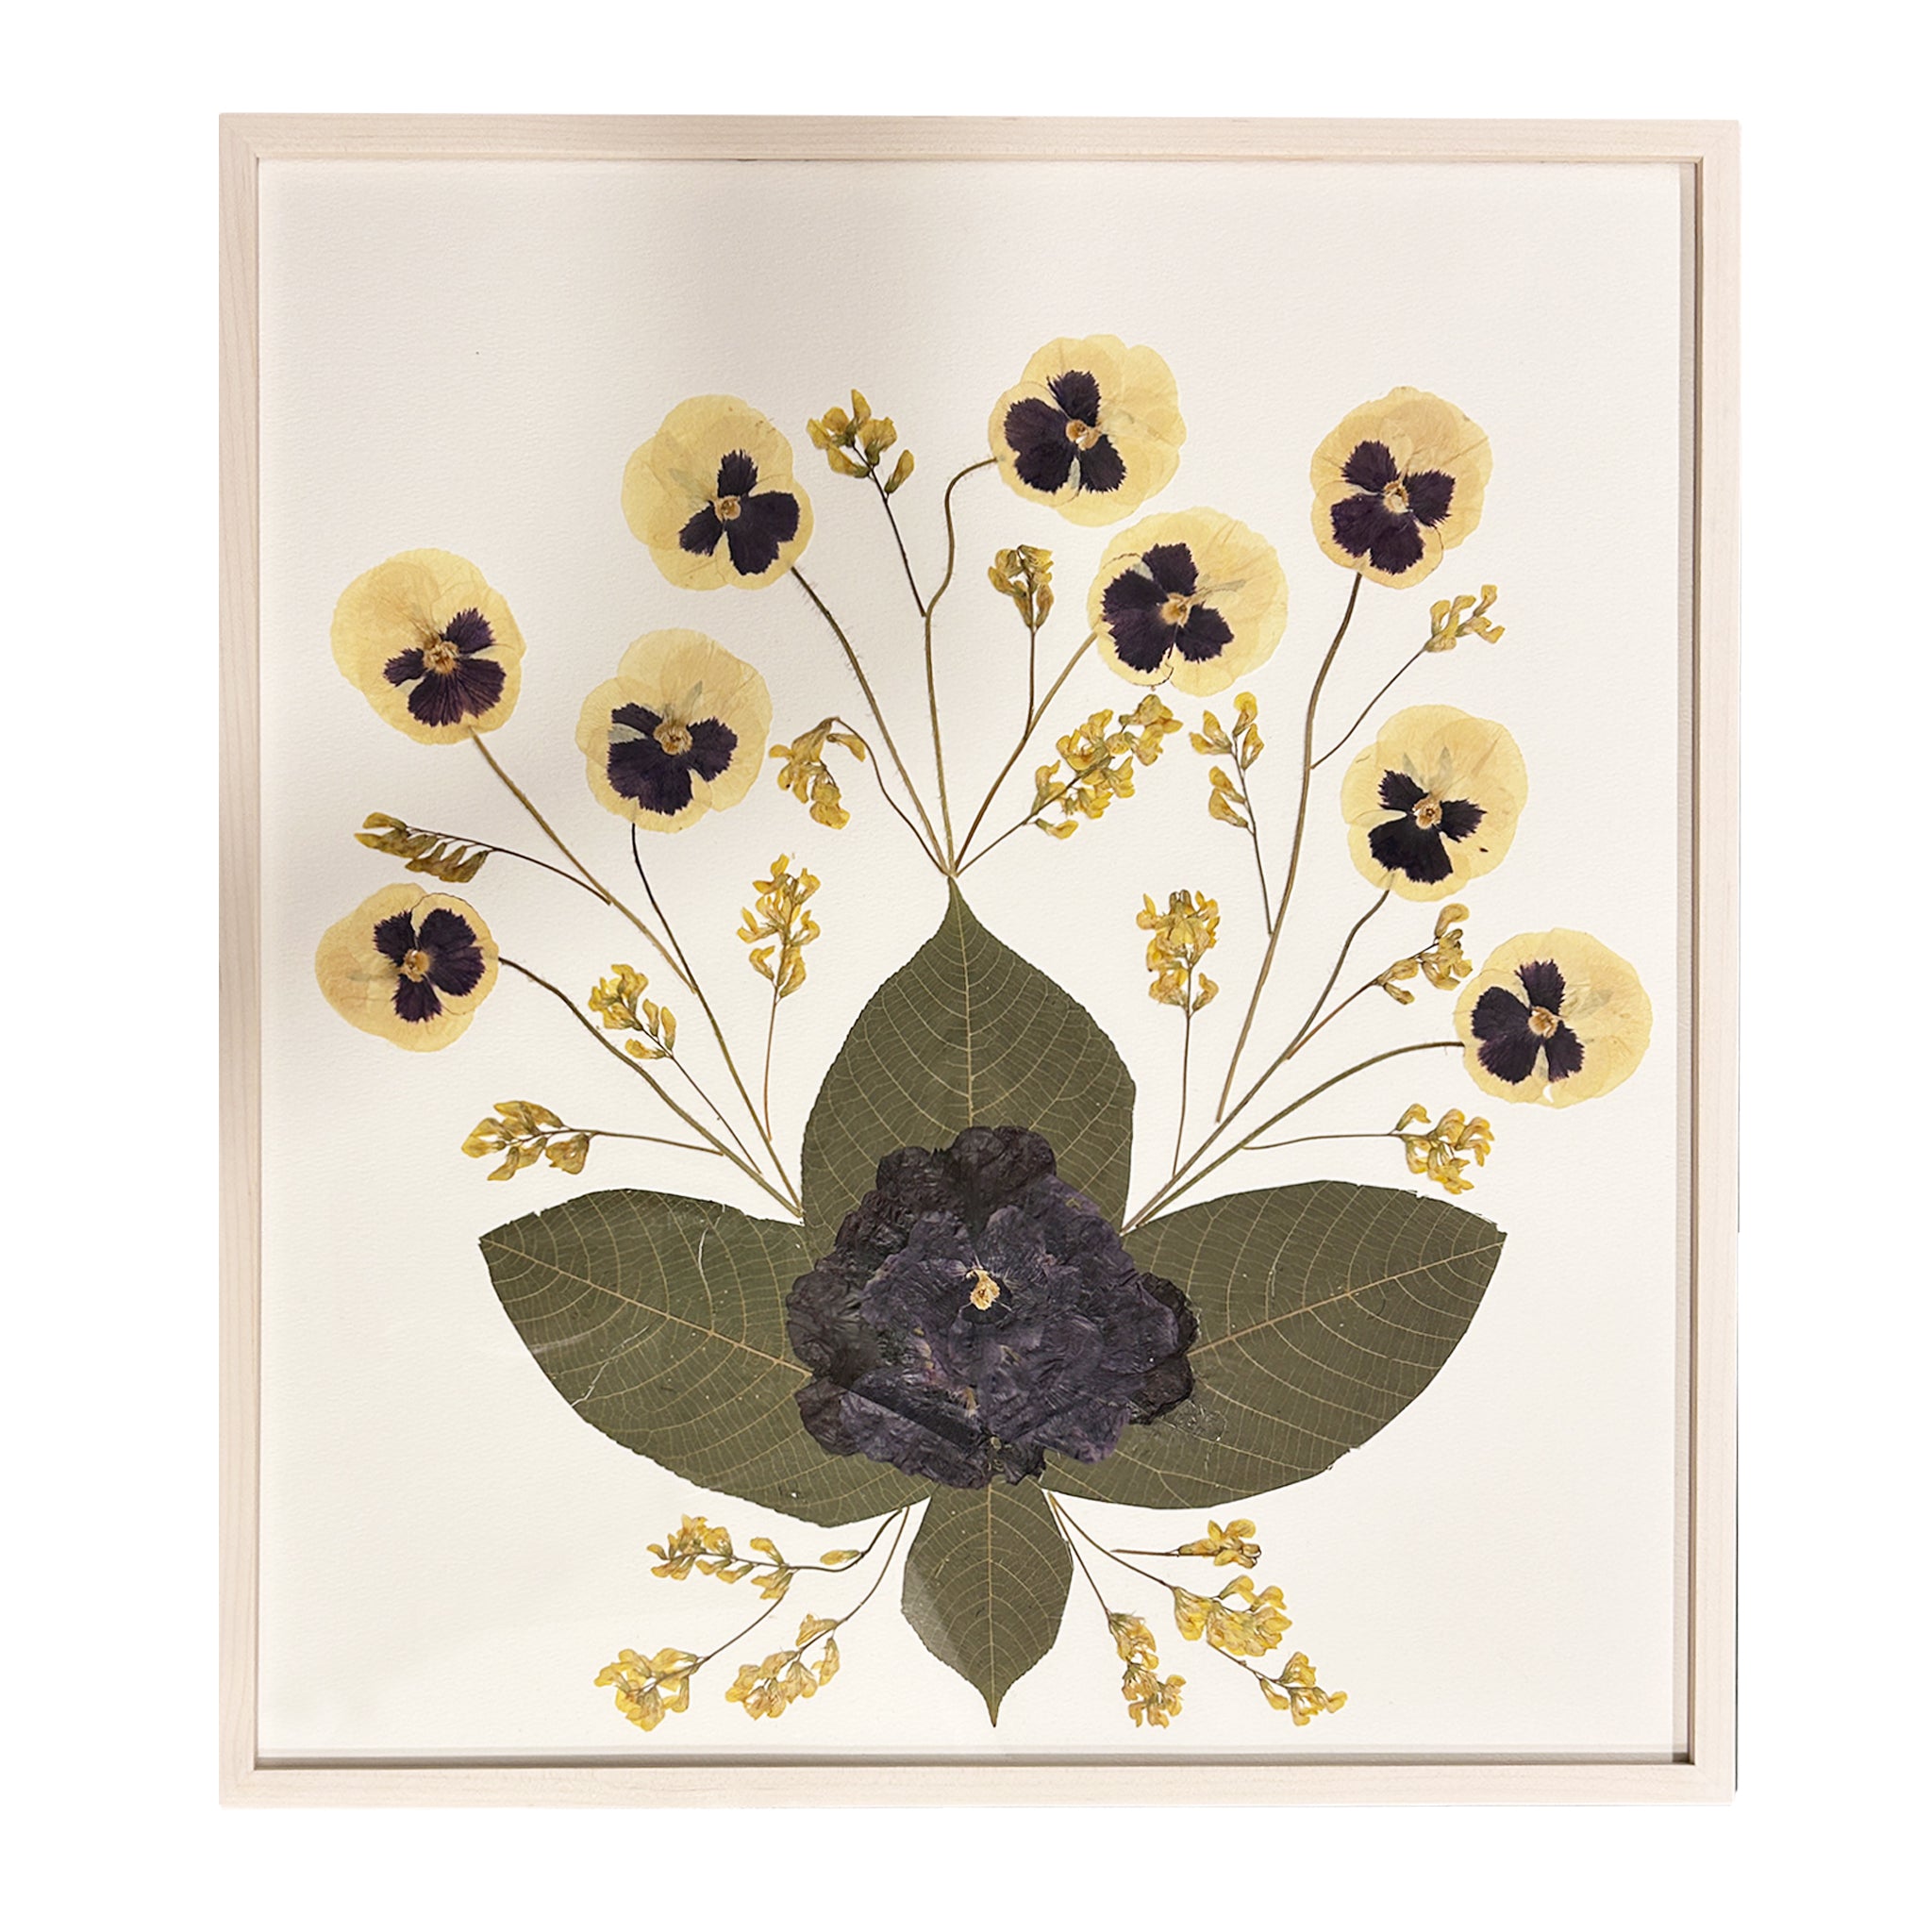 Marian McEvoy, Collage of Pansies Forsythia and Columbine with English Walnut Leaves